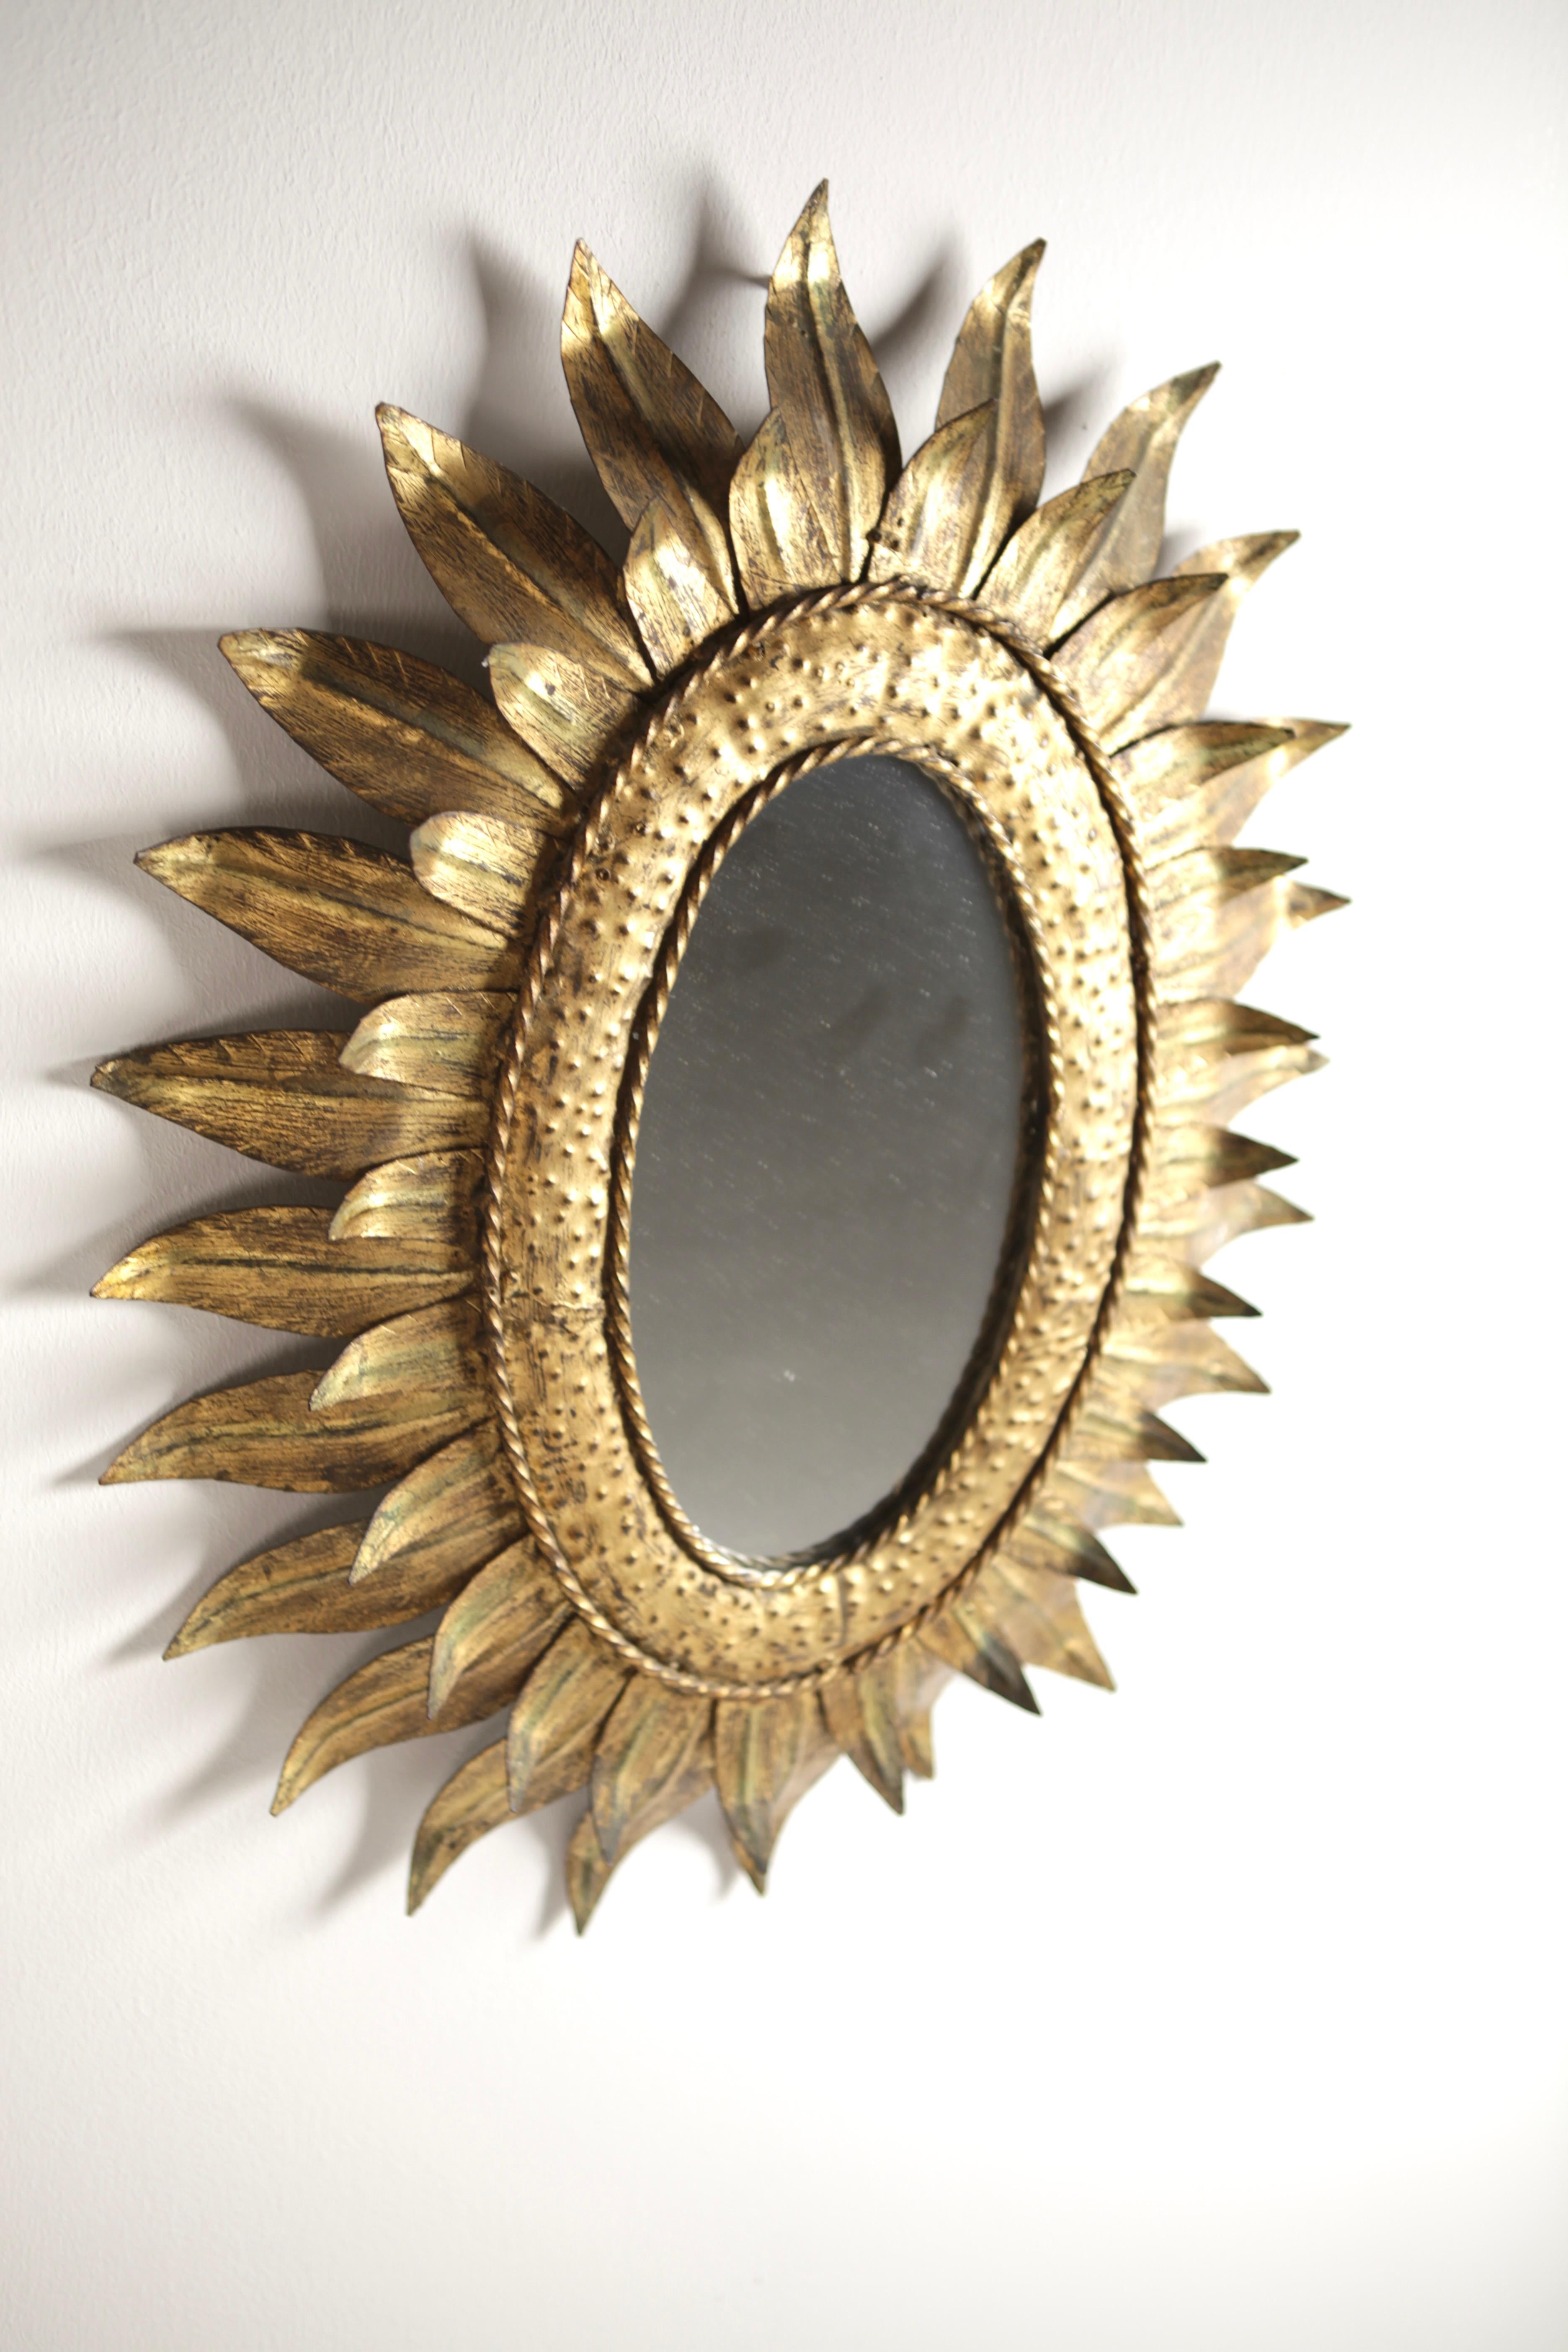 A beautiful oval shaped sunburst mirror with gilt leaves in two sizes.
Very nice aged patina, handcrafted in Spain in the 1950s.